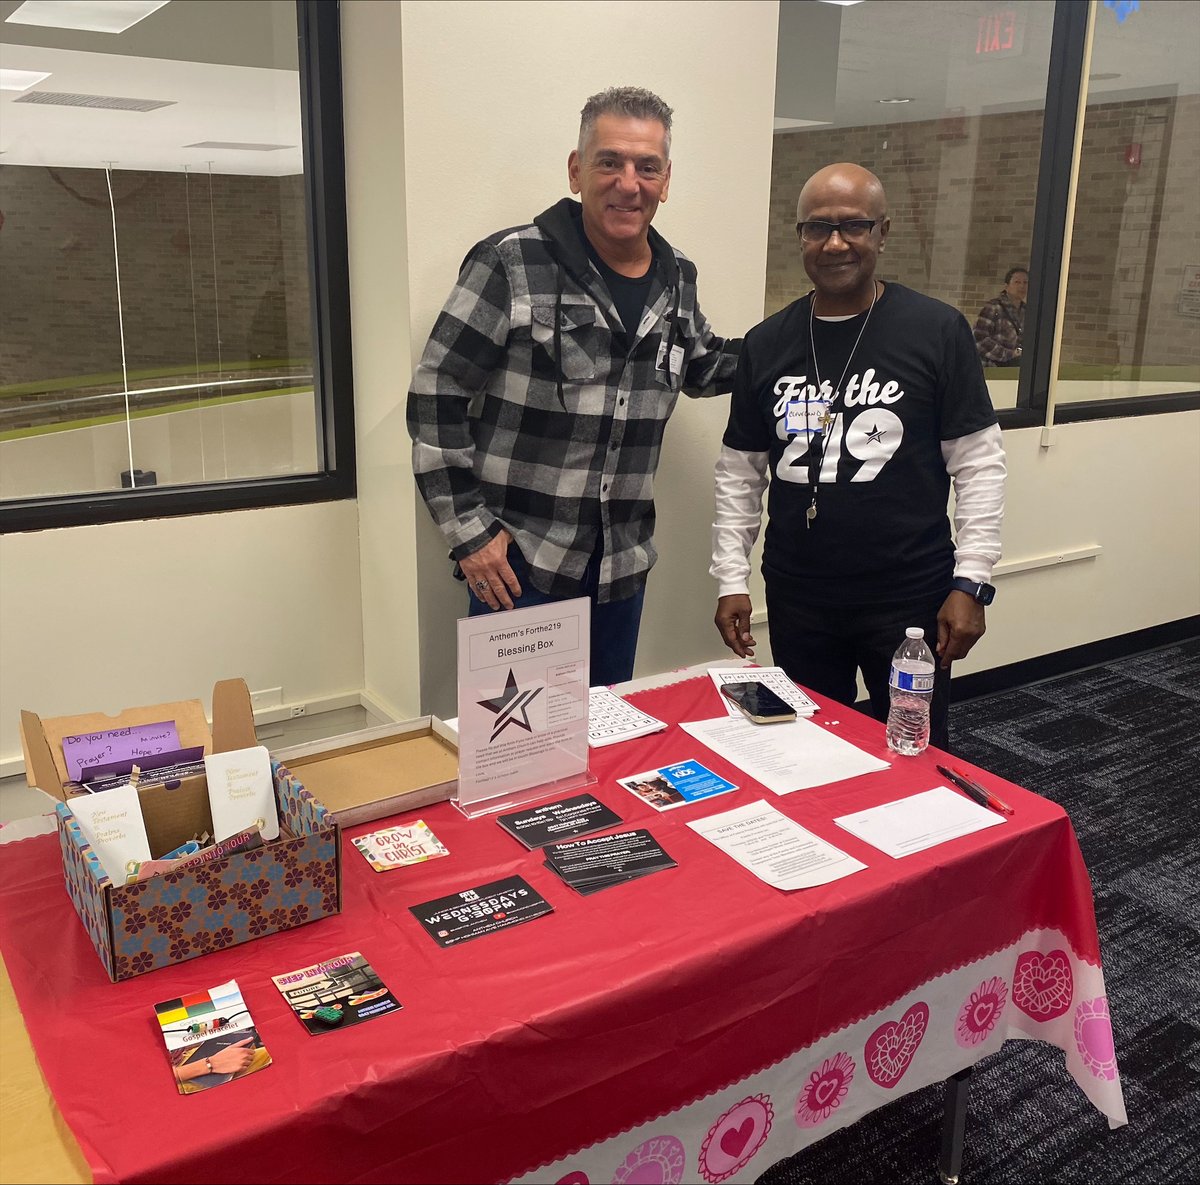 Everybody loves BINGO! We're also here helping families complete the EBT applications. We hope to see you at our next session tonight at 4:30 at The Welcome Center.